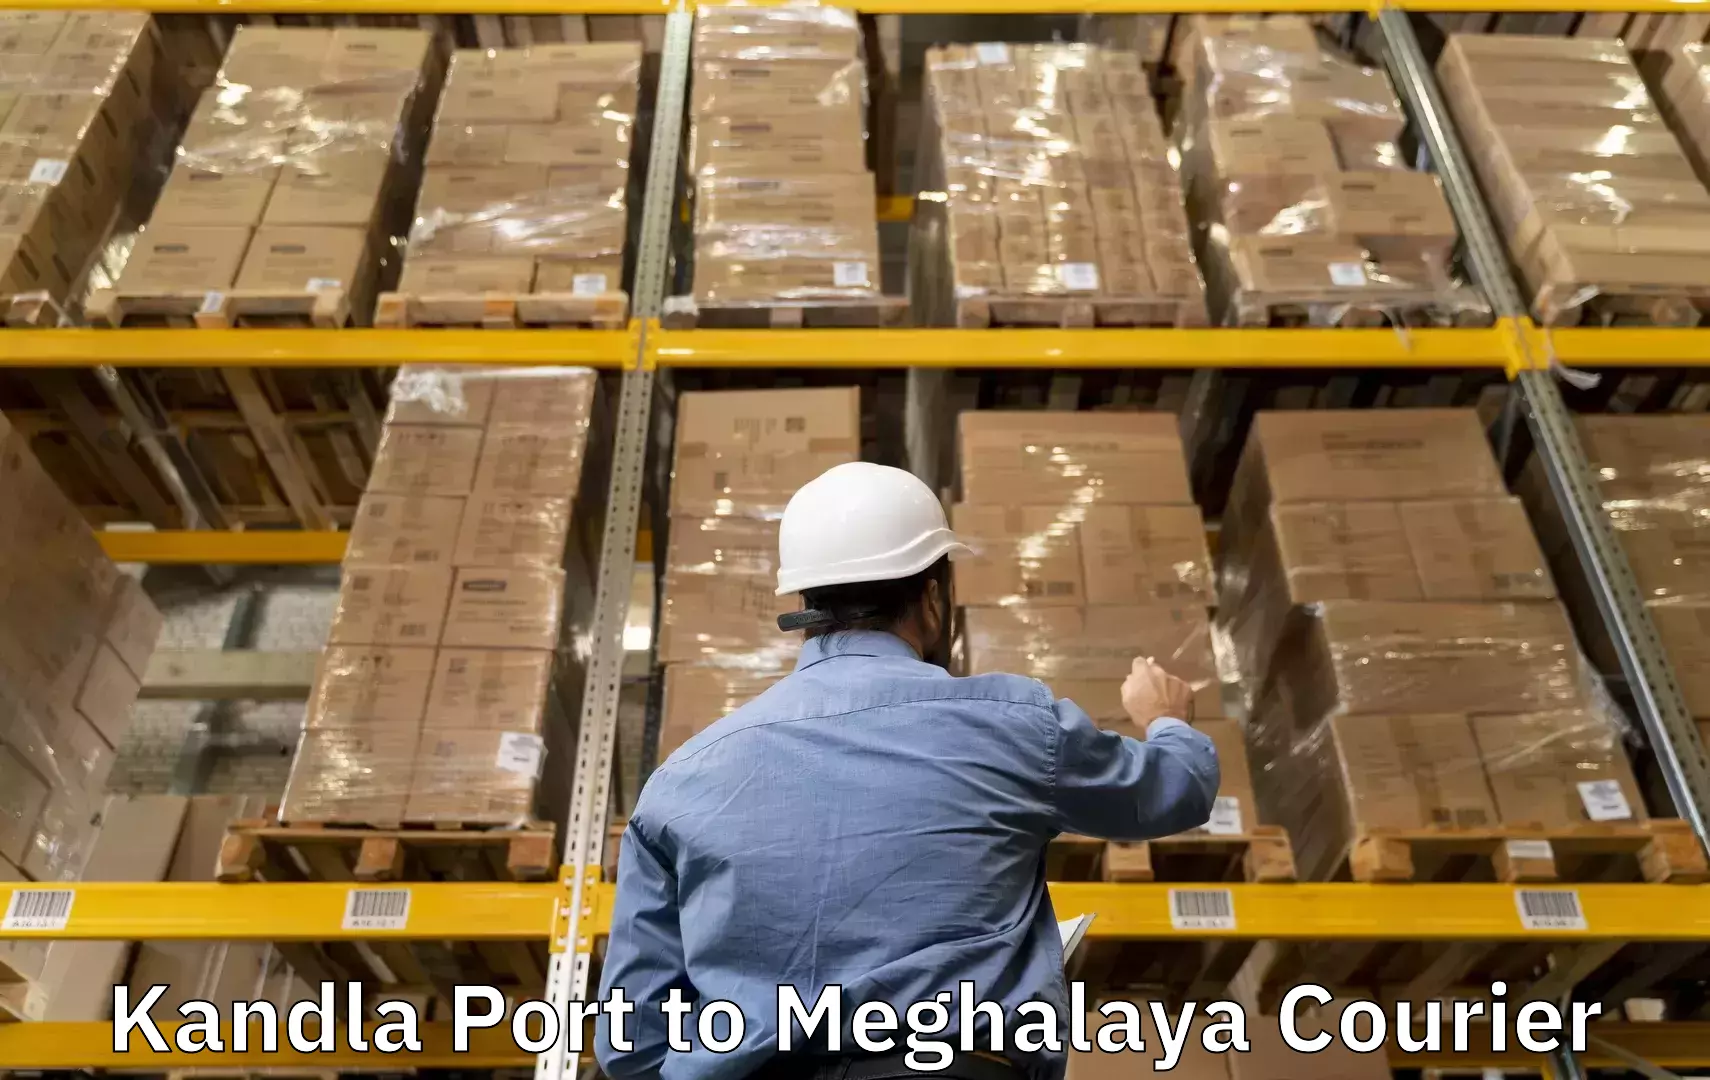 Reliable luggage courier Kandla Port to Nongpoh